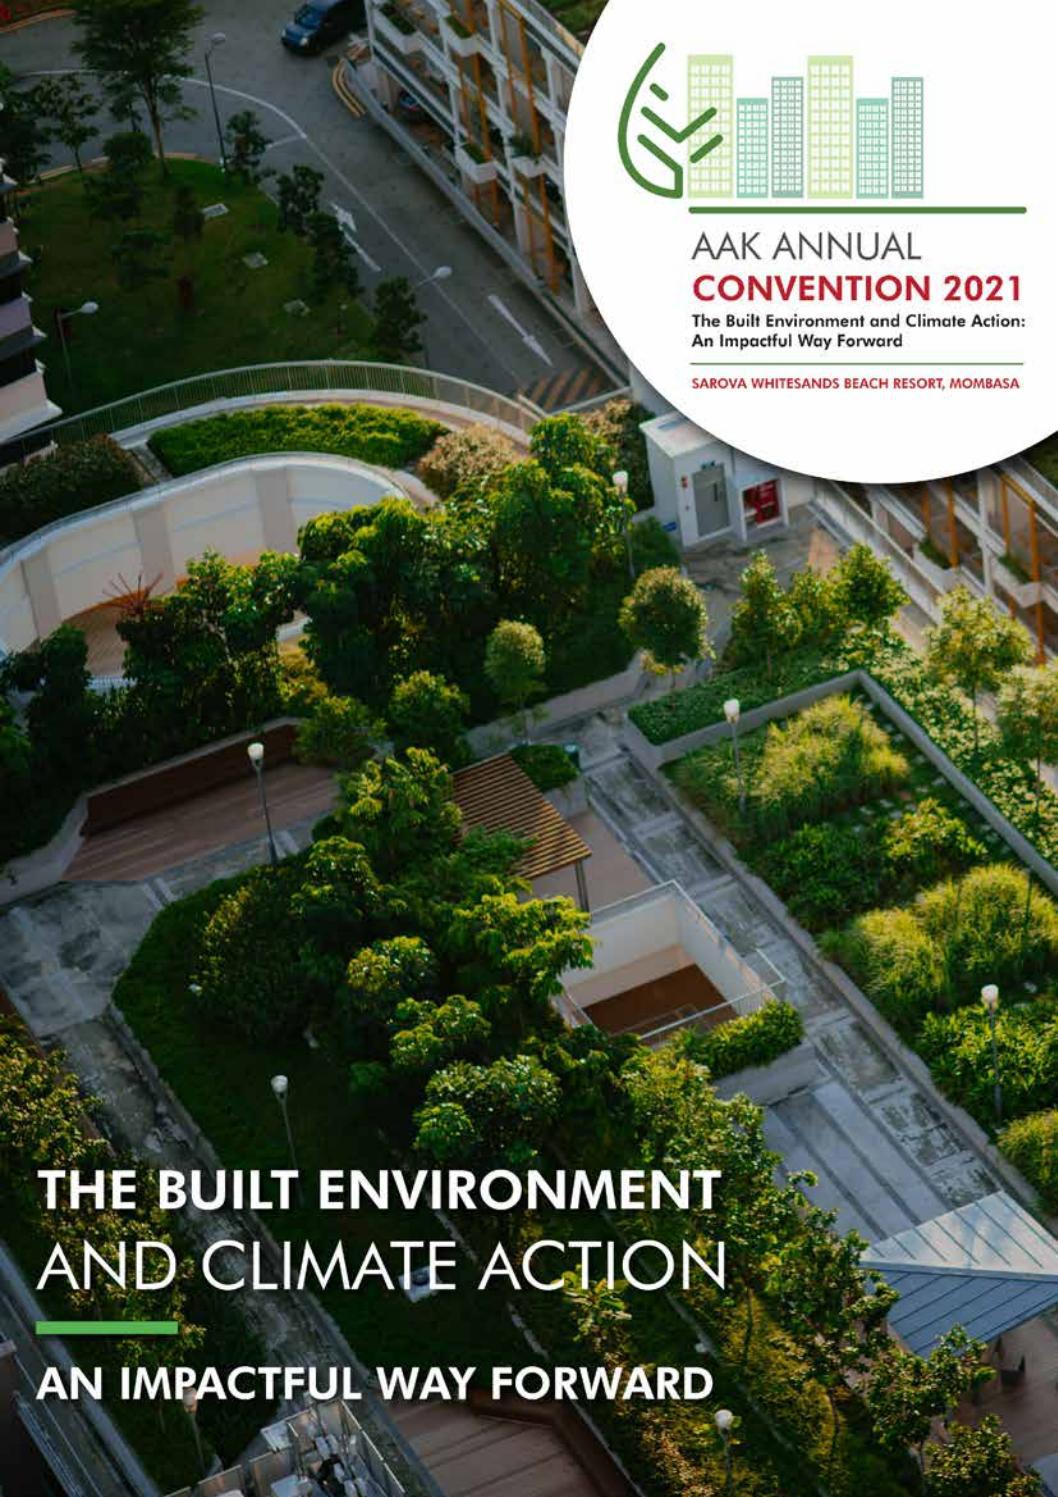 The AAK Convention 2021 Magazine